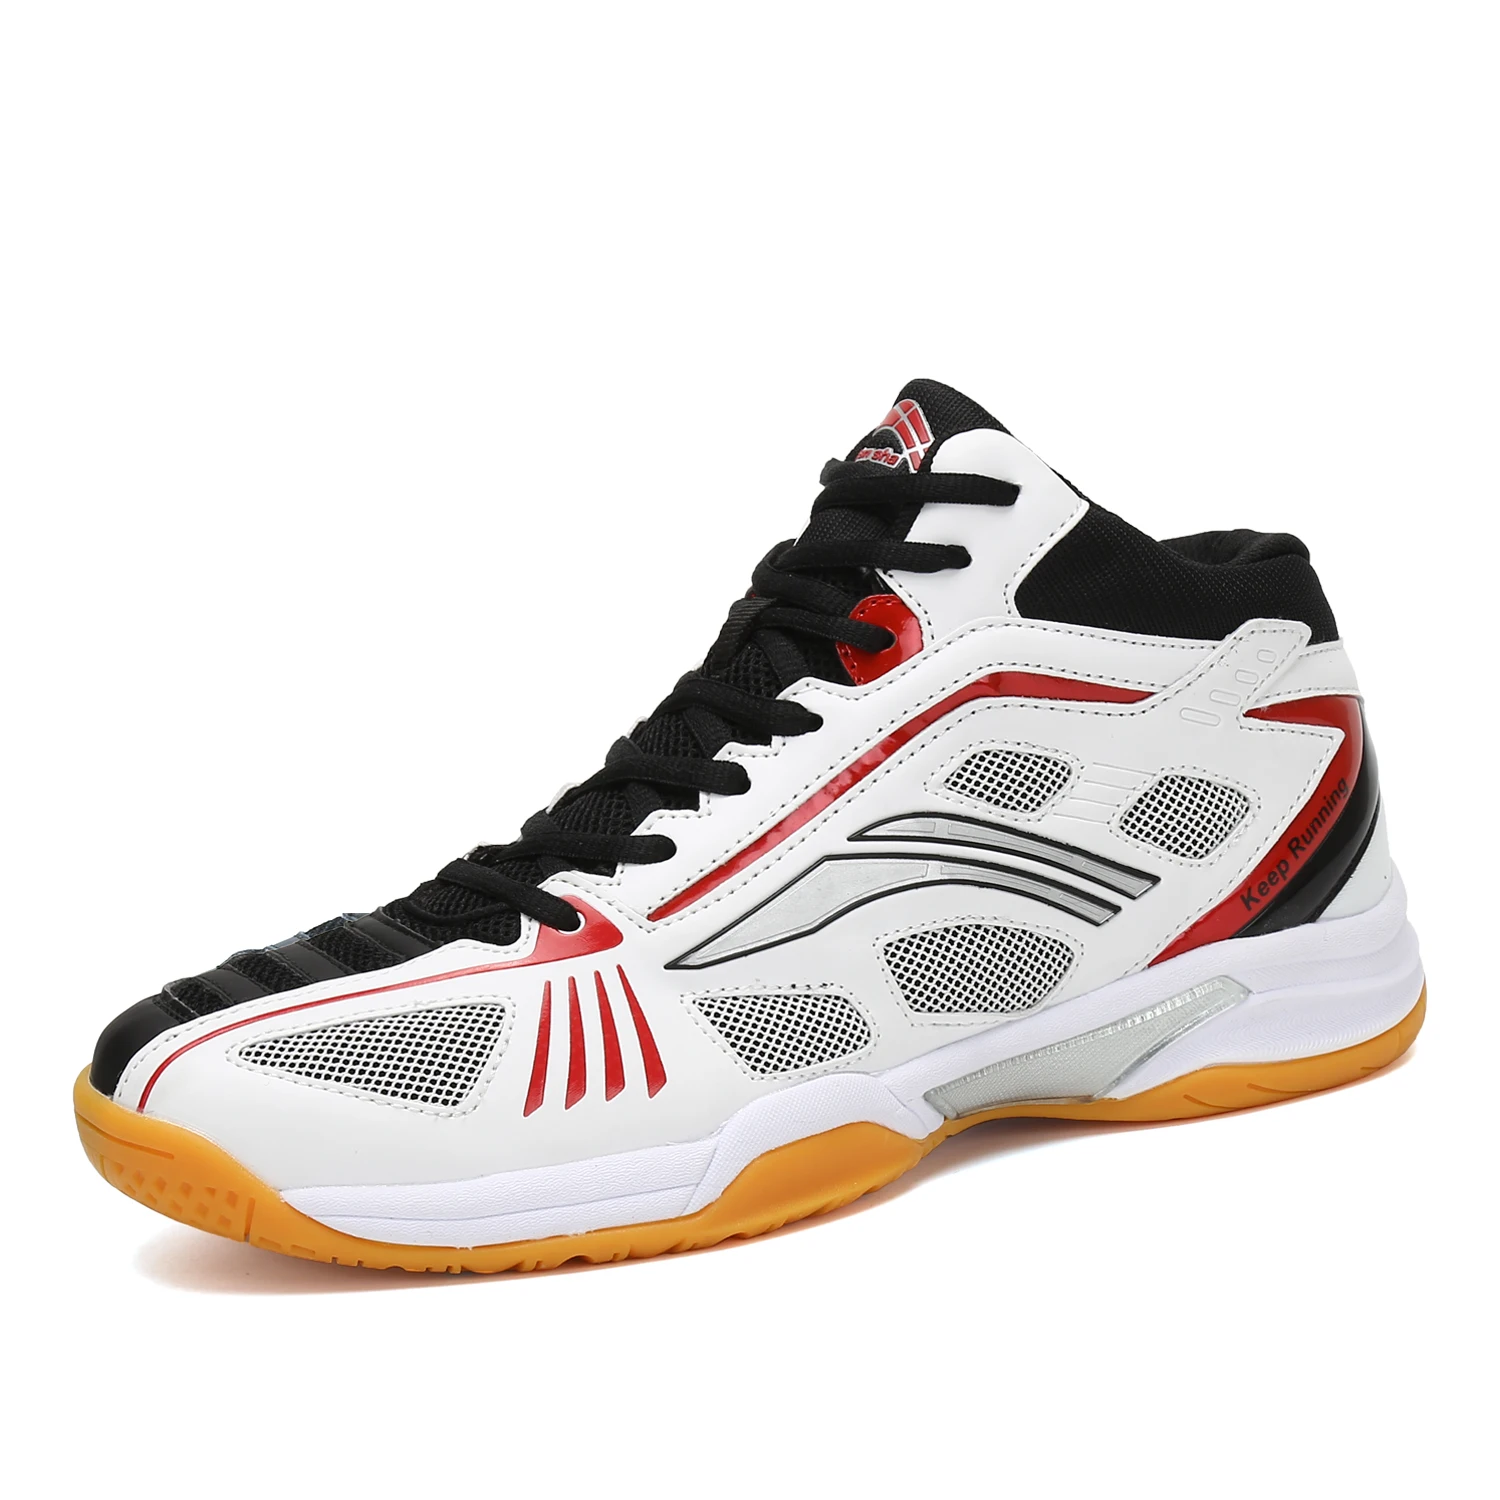 

Mens Athletic Court Squash Volleyball Badminton Tennis Shoes Indoor Outdoor Non Slip Cross Training